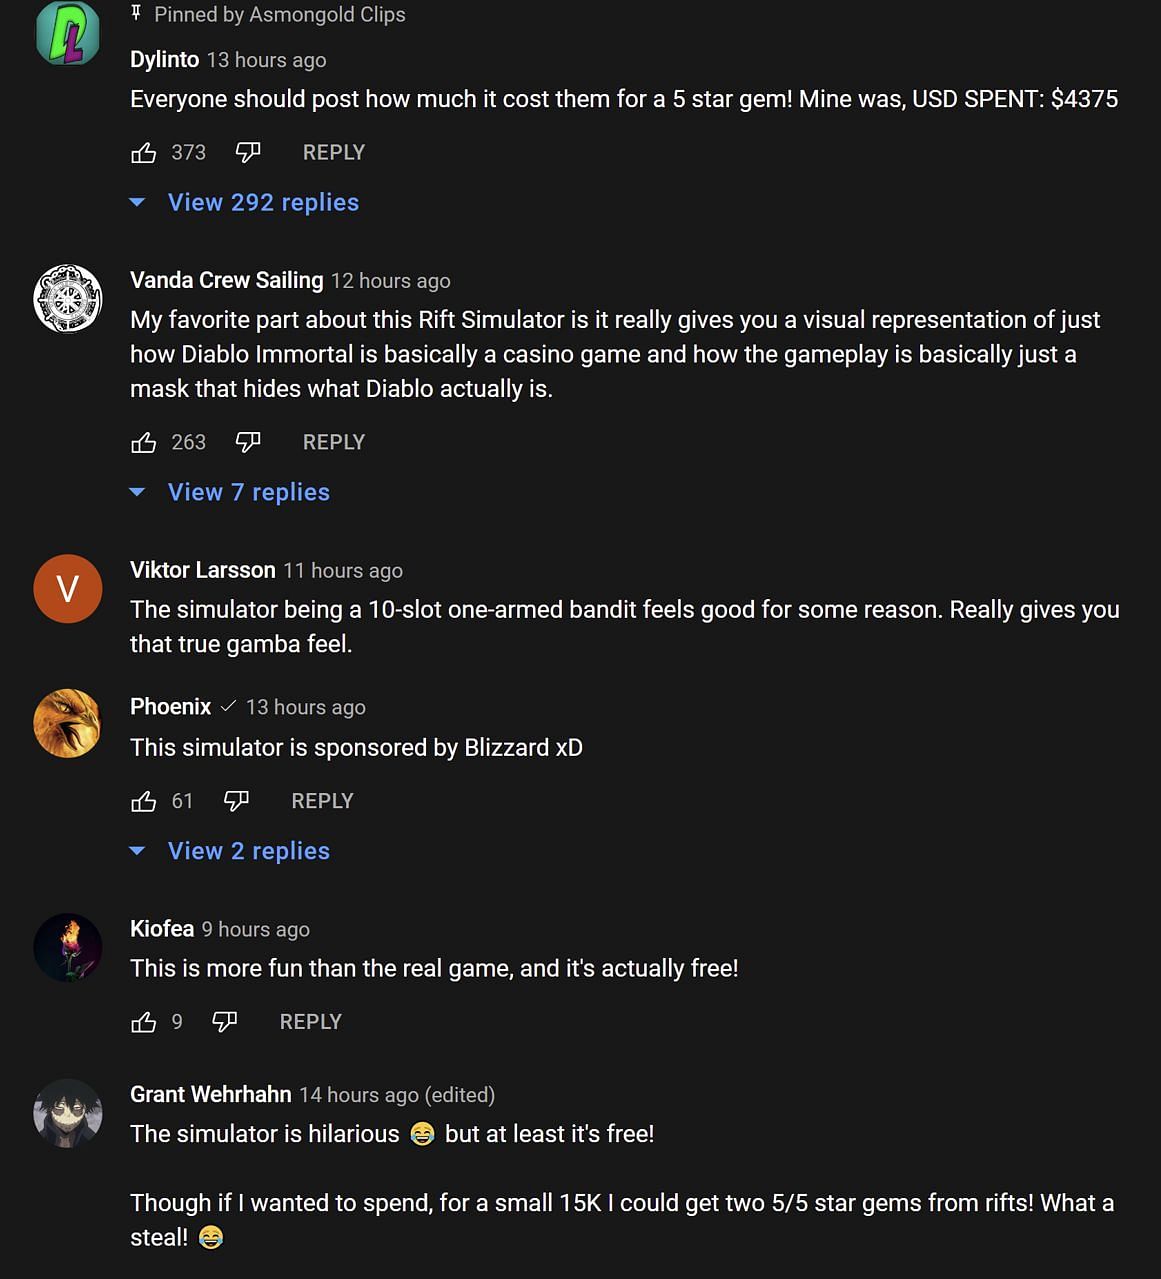 Fans provide their take on Diablo Immortal (Image via Asmongold Clips/YouTube)